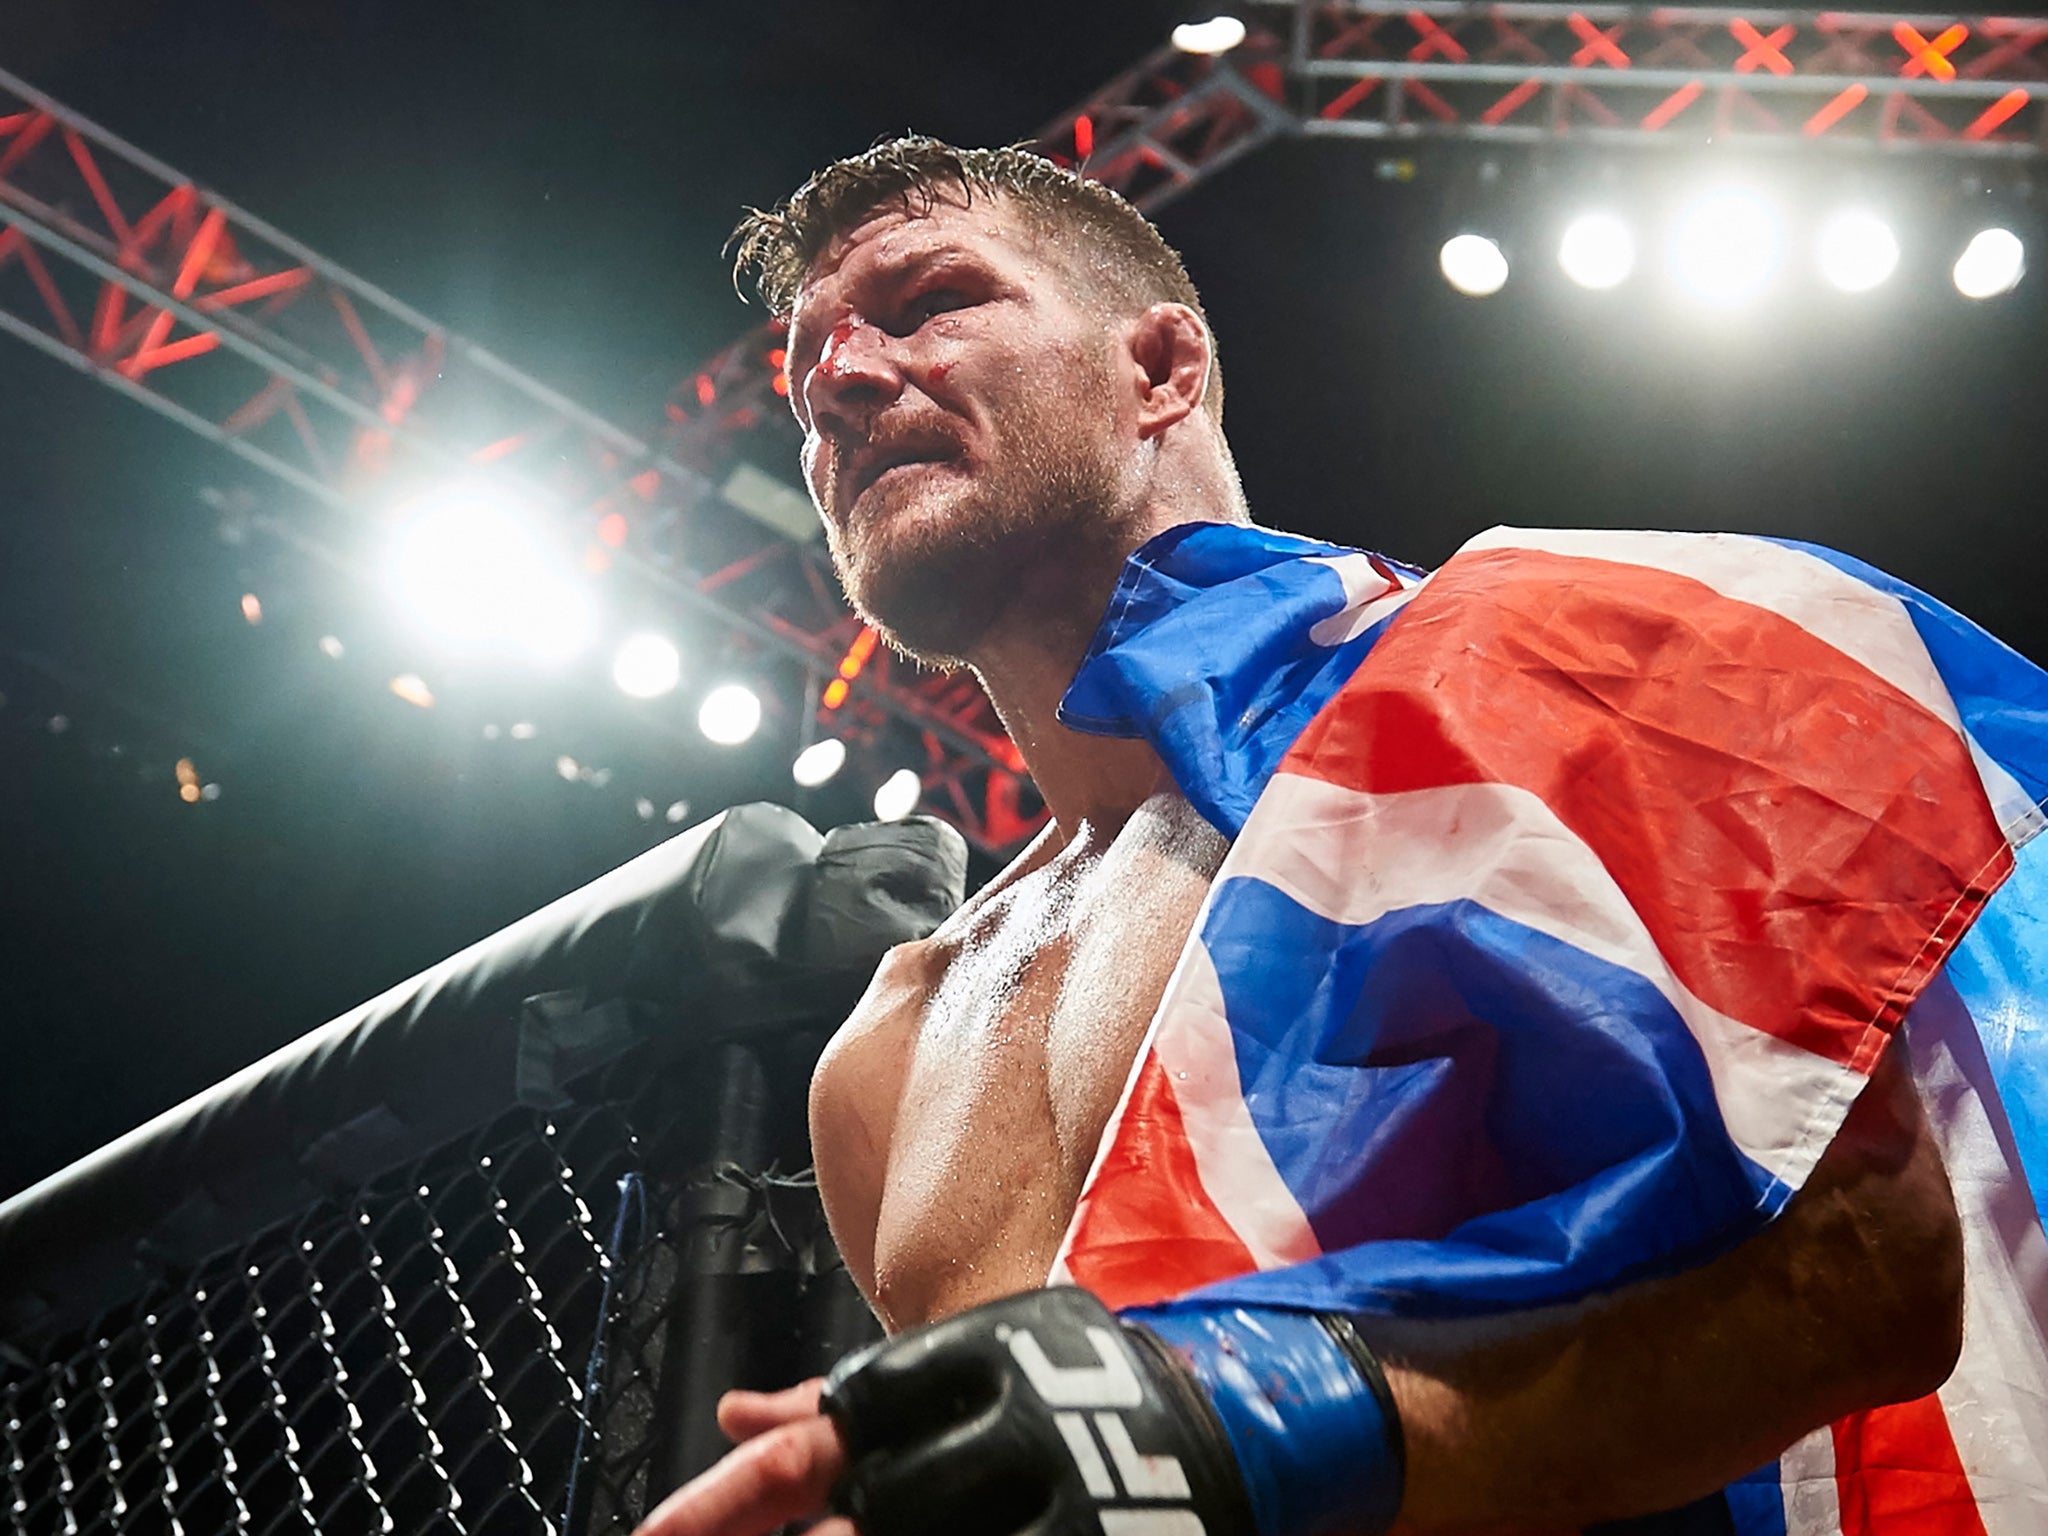 &#13;
Bisping beat Anderson Silva at UFC London in February (Getty)&#13;